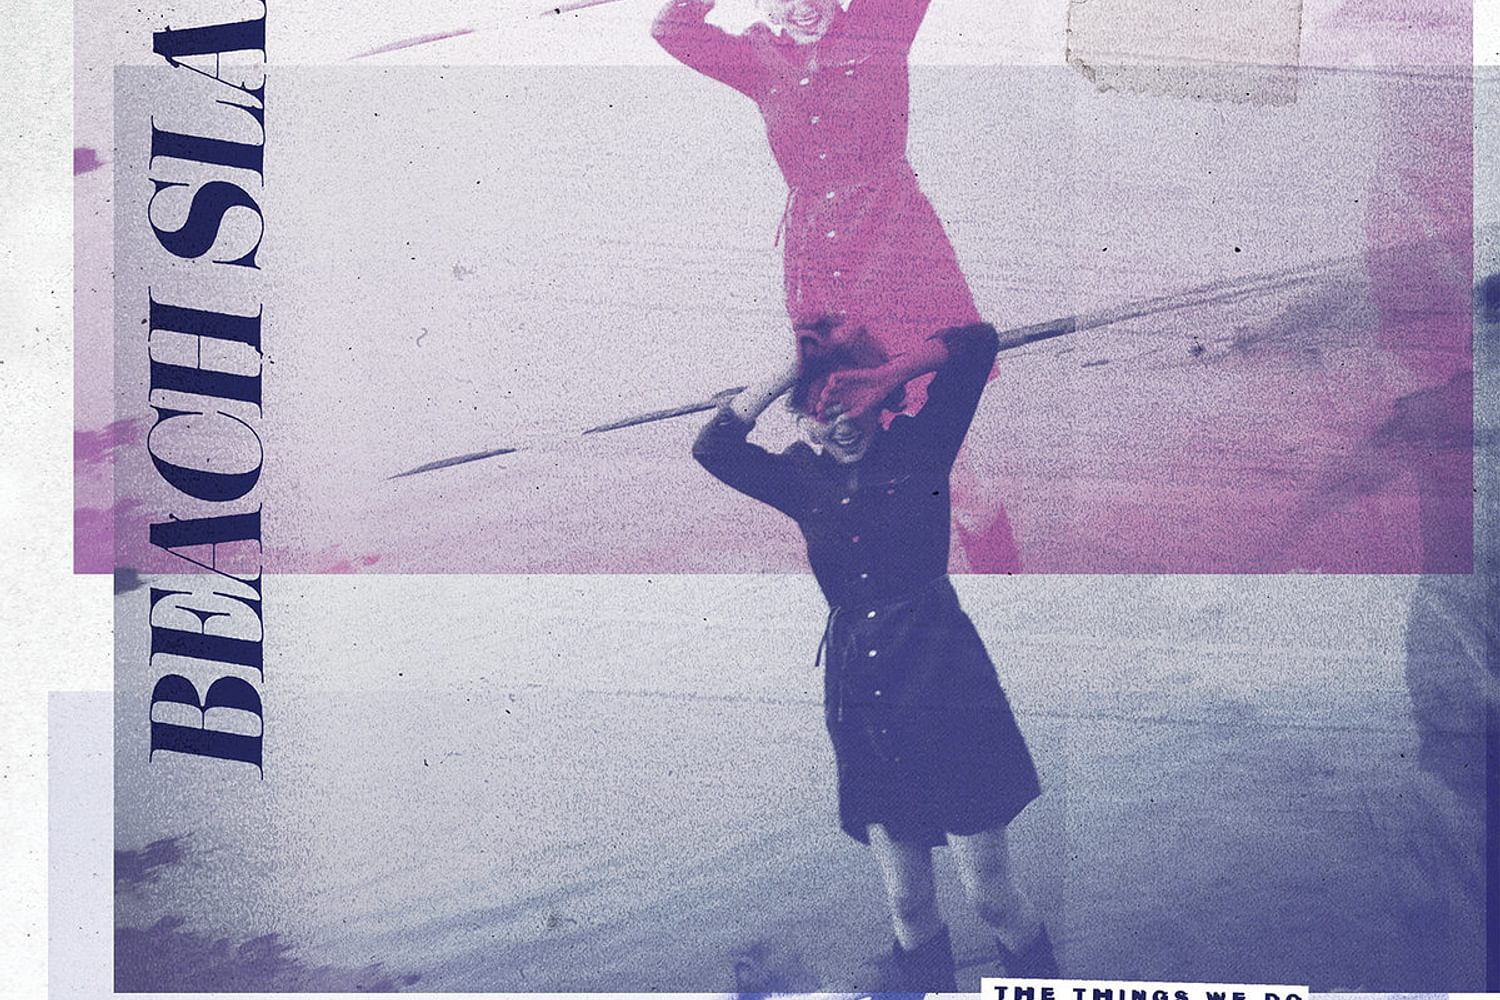 Beach Slang – The Things We Do To Find People Who Feel Like Us